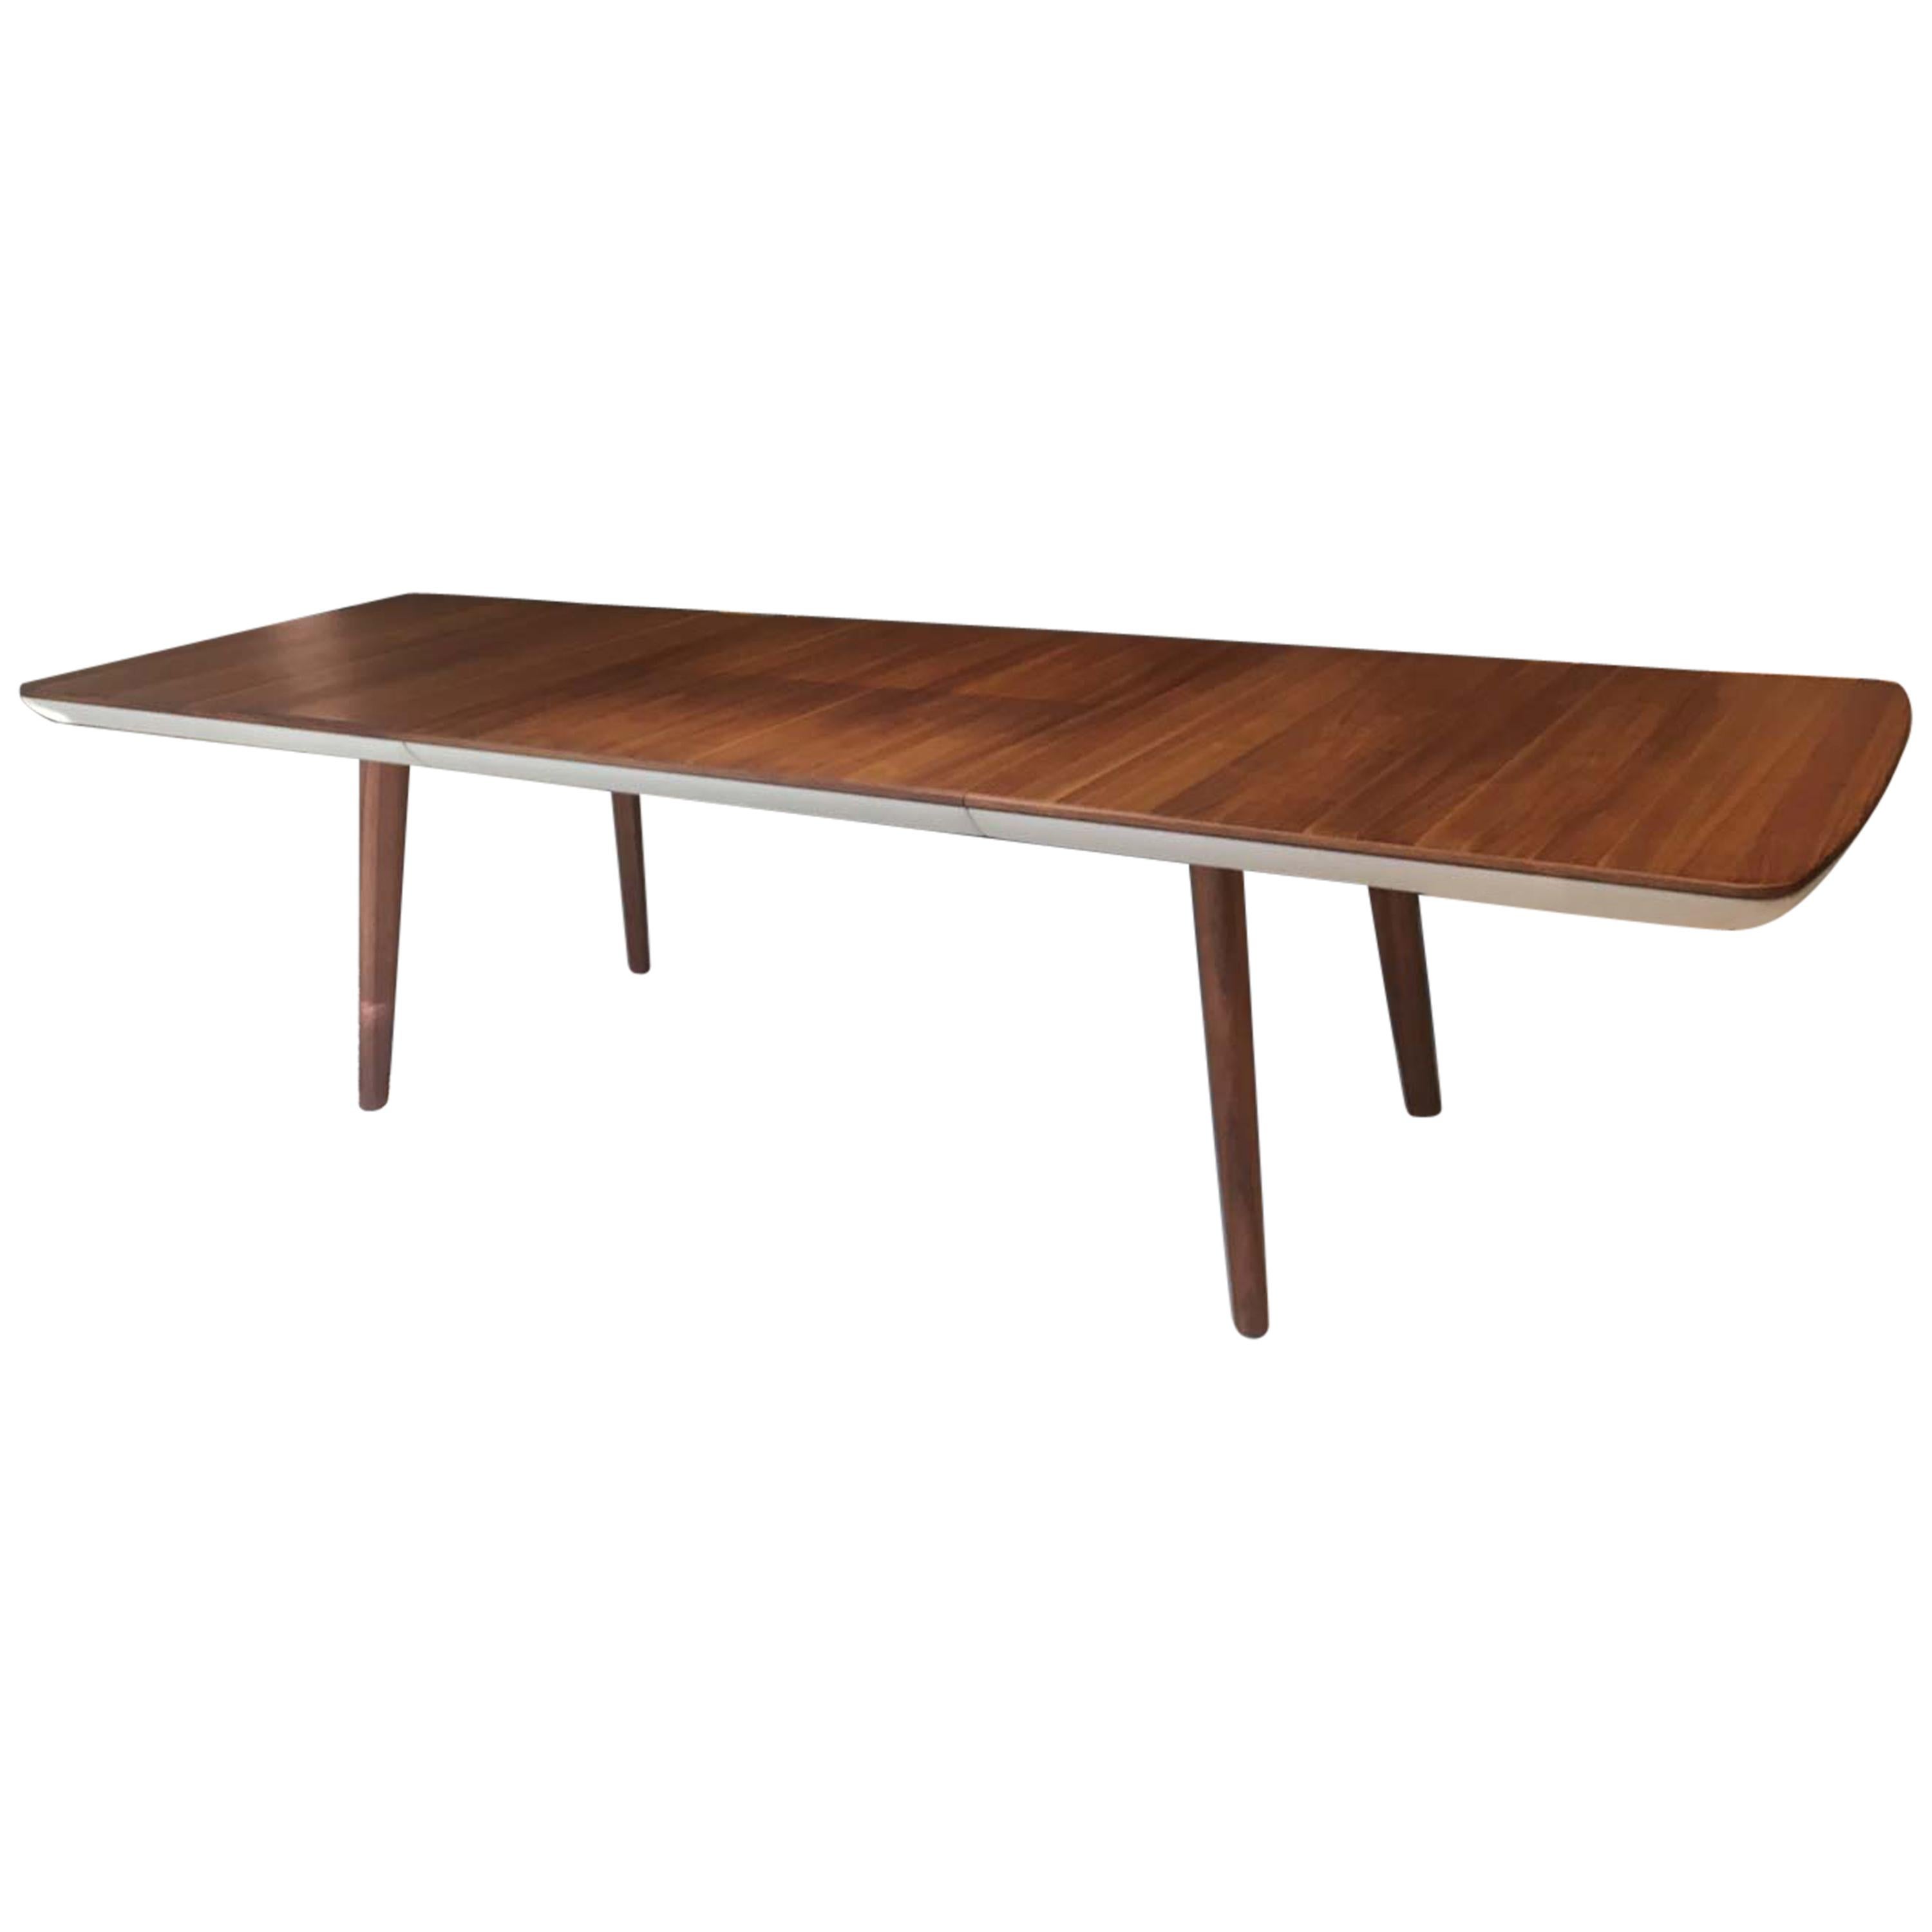 Solid Walnut Wood Extending Table 79" Opens to 118" W/ Leather Skirt by Team 7 